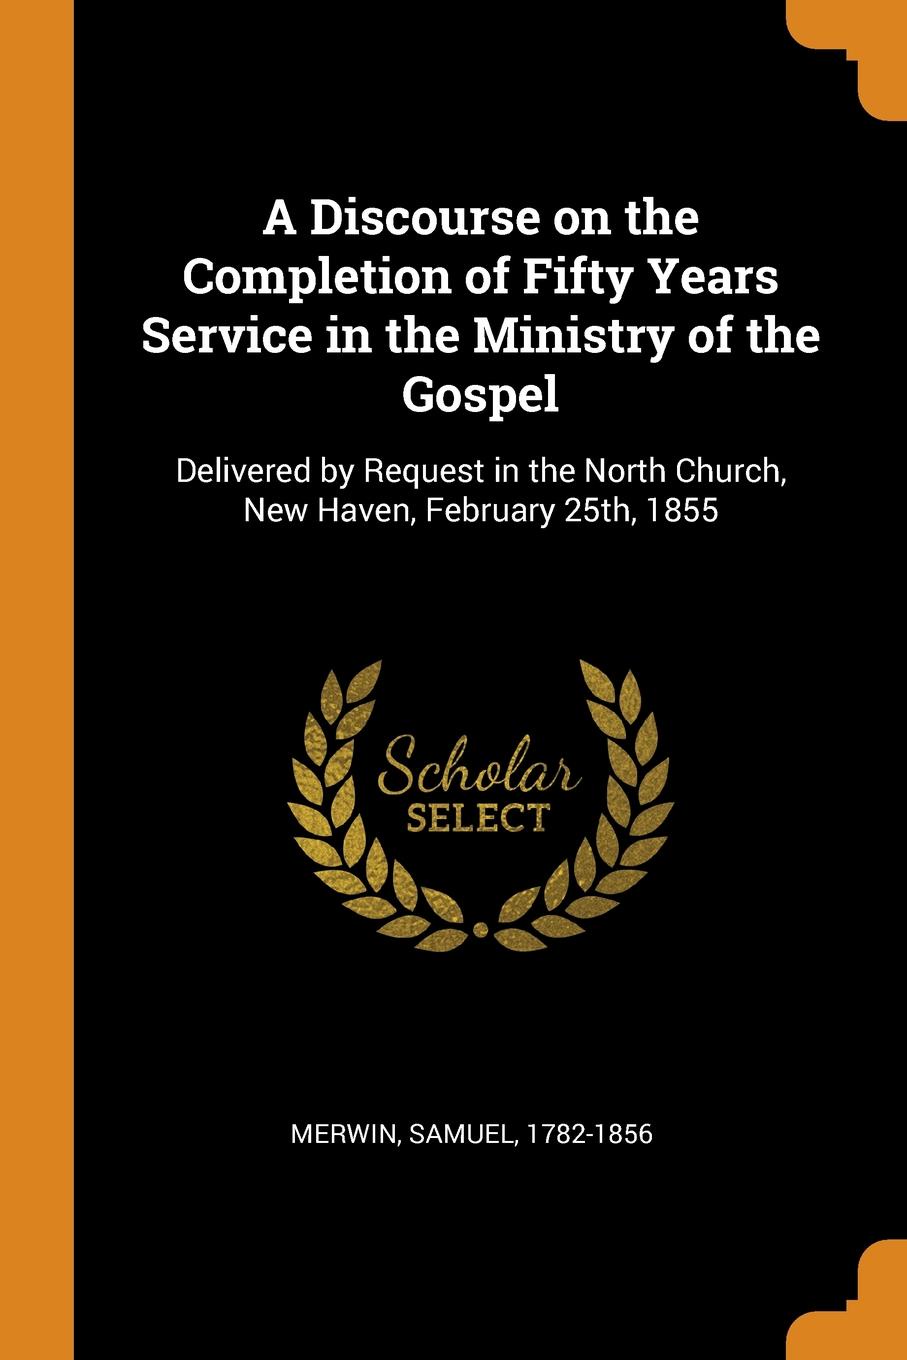 A Discourse on the Completion of Fifty Years Service in the Ministry of the Gospel. Delivered by Request in the North Church, New Haven, February 25th, 1855